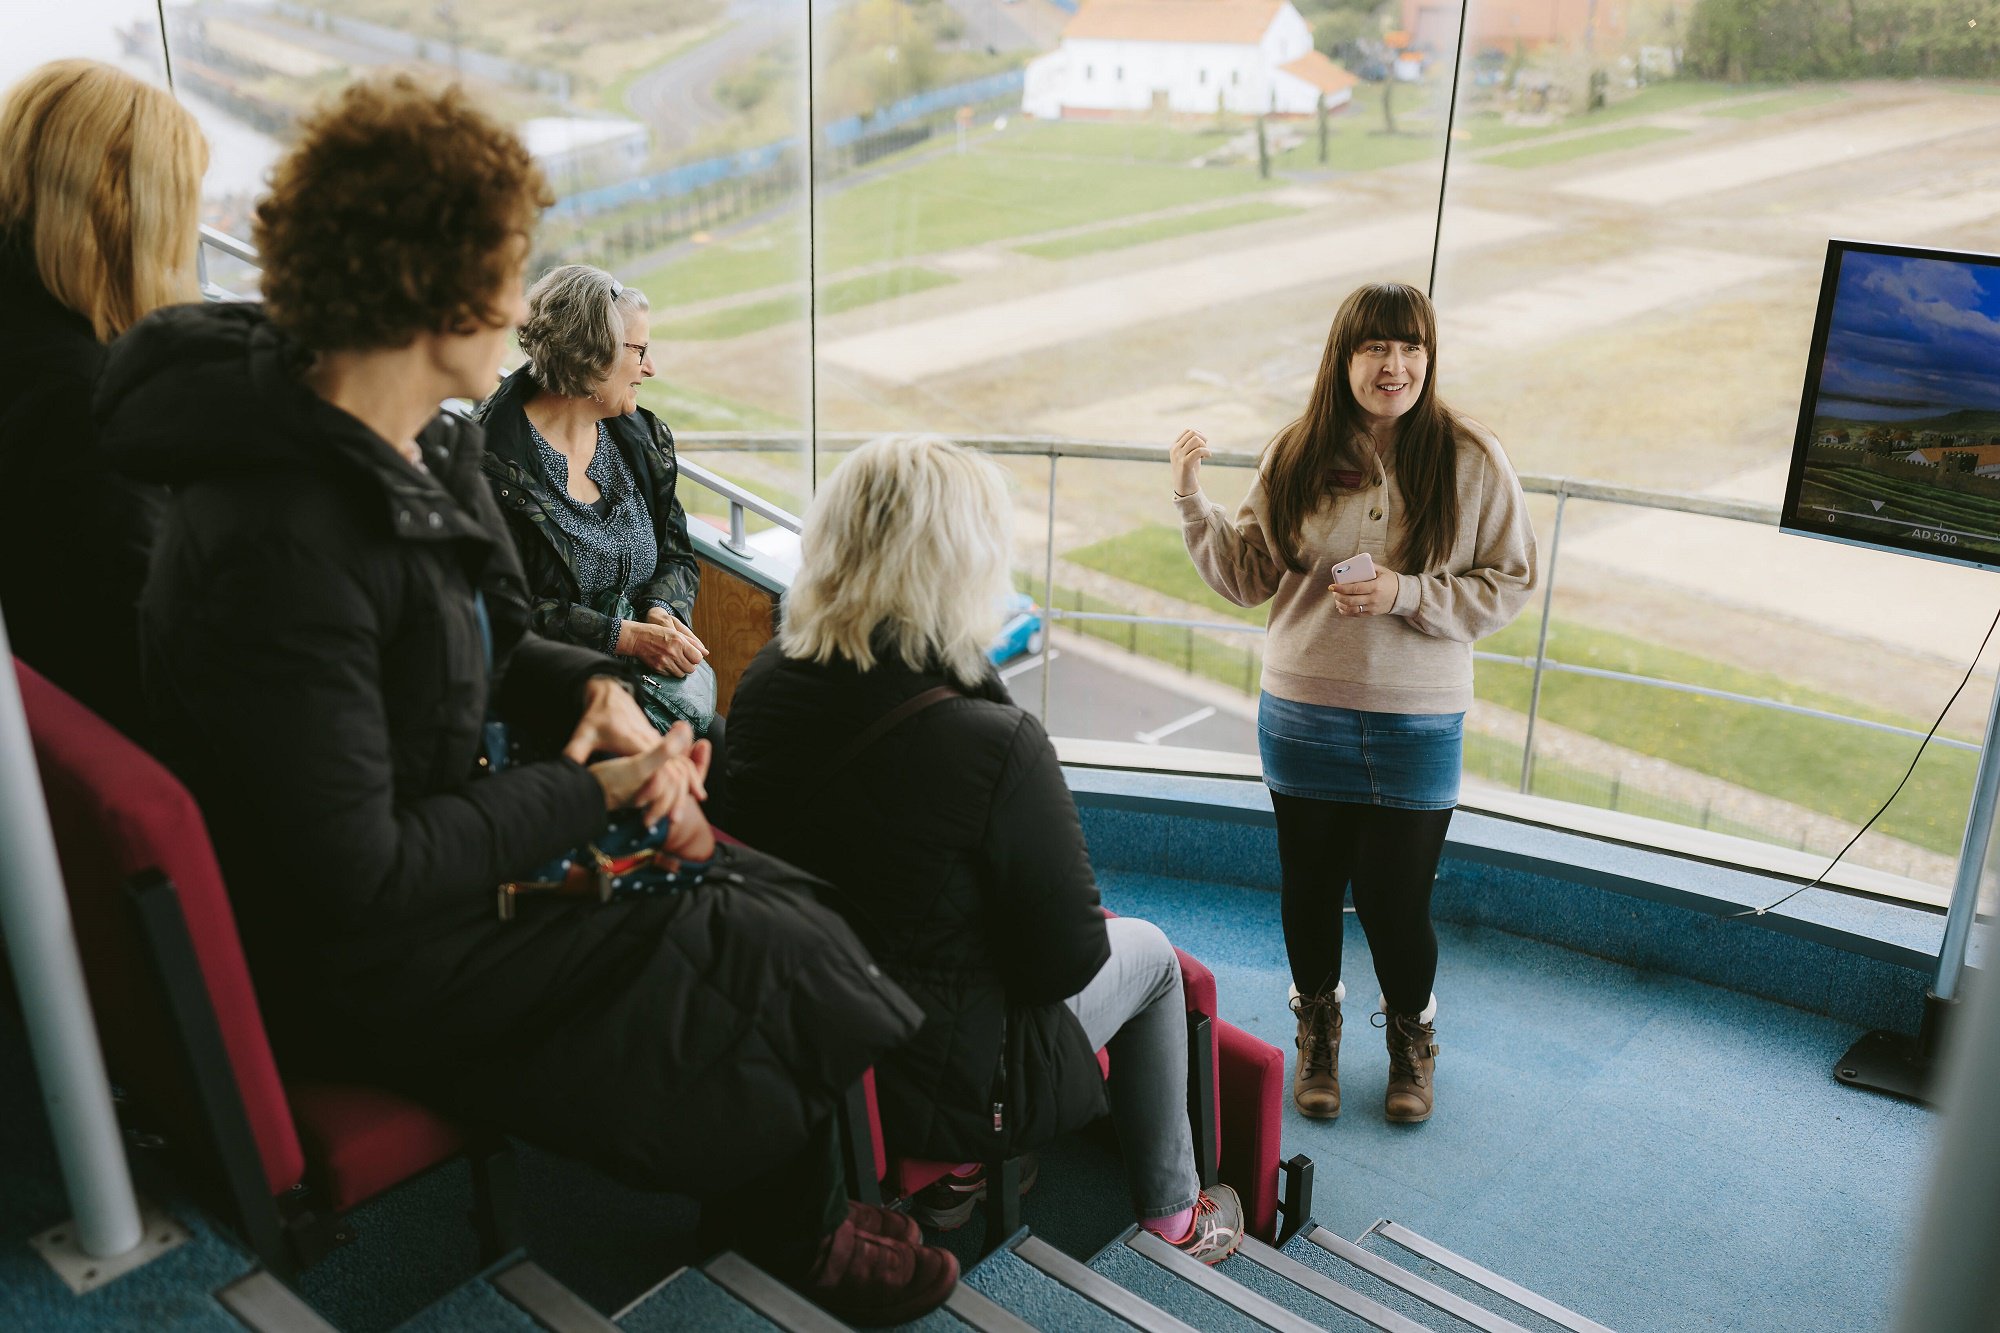 Woman leading an outreach session in a viewing tower above ruins of a Roman fort.